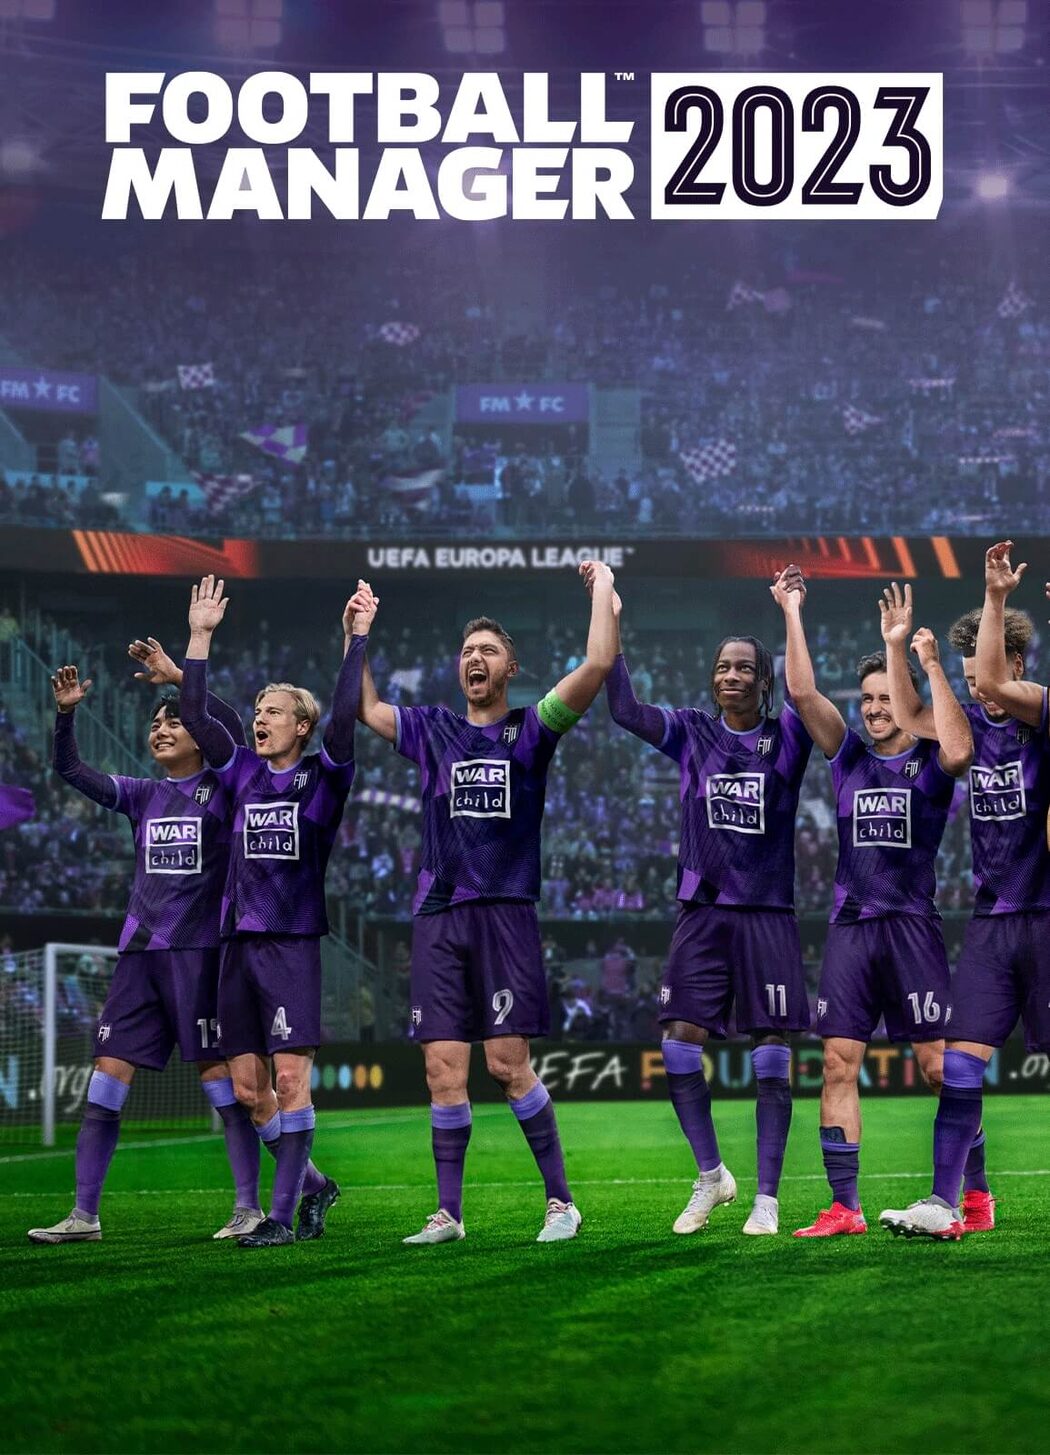 Buy Football Manager 2022 In-game Editor (PC) - Steam Gift - EUROPE - Cheap  - !